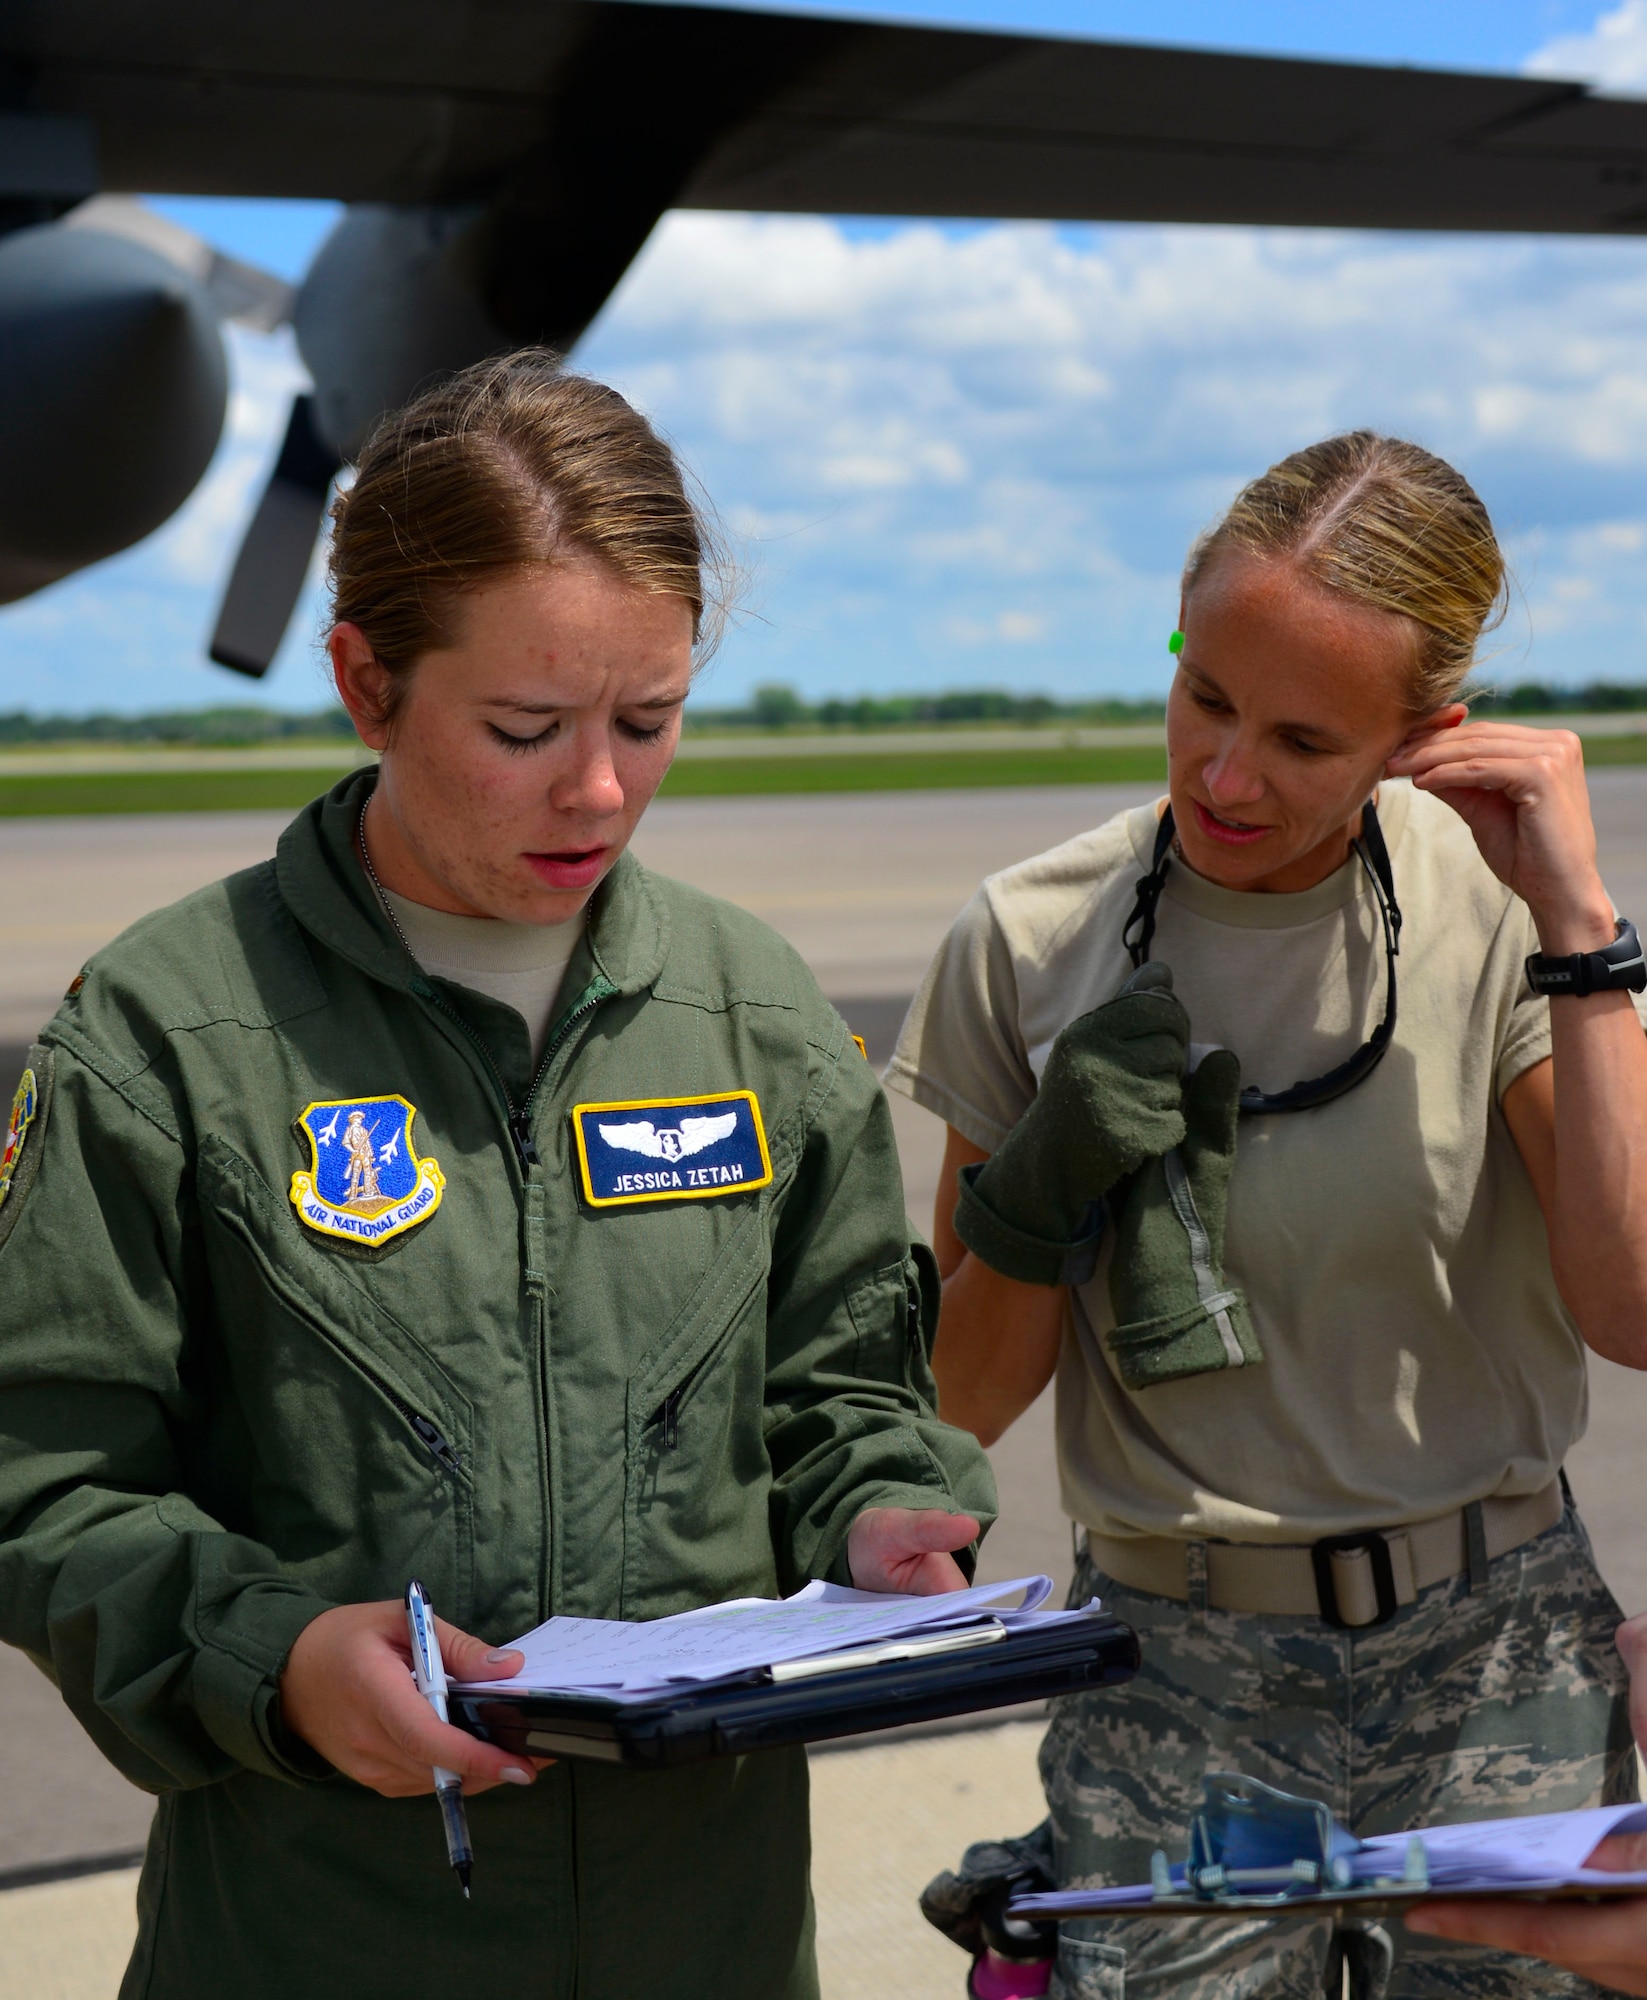 U.S. Air Force 2nd Lt. Jessica Zetah, left, receives patient information from Capt. Amy Nordquist at Volk Field Combat Readiness Training Center, Wis., July 22, 2015. Zetch and Nordquist are taking part in the annual PATRIOT Exercise, a domestic operations disaster-response training exercise conducted by National Guard units working with state and local emergency management agencies and first responders. 
(U.S. Air National Guard photo by Tech. Sgt. Amy M. Lovgren/Released)